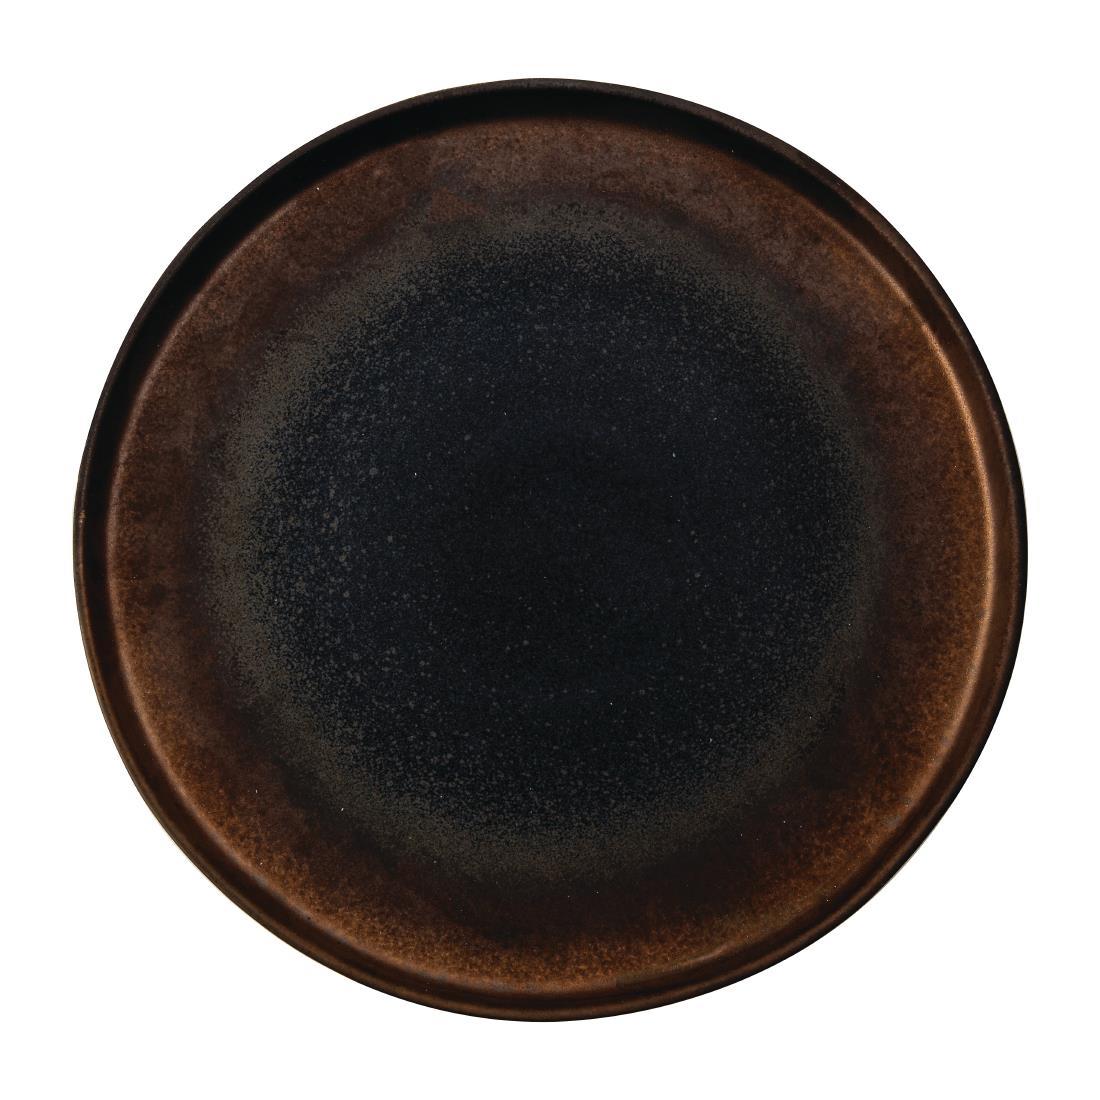 Olympia Ochre Flat Plates 260mm (Pack of 6) - FC285  - 1